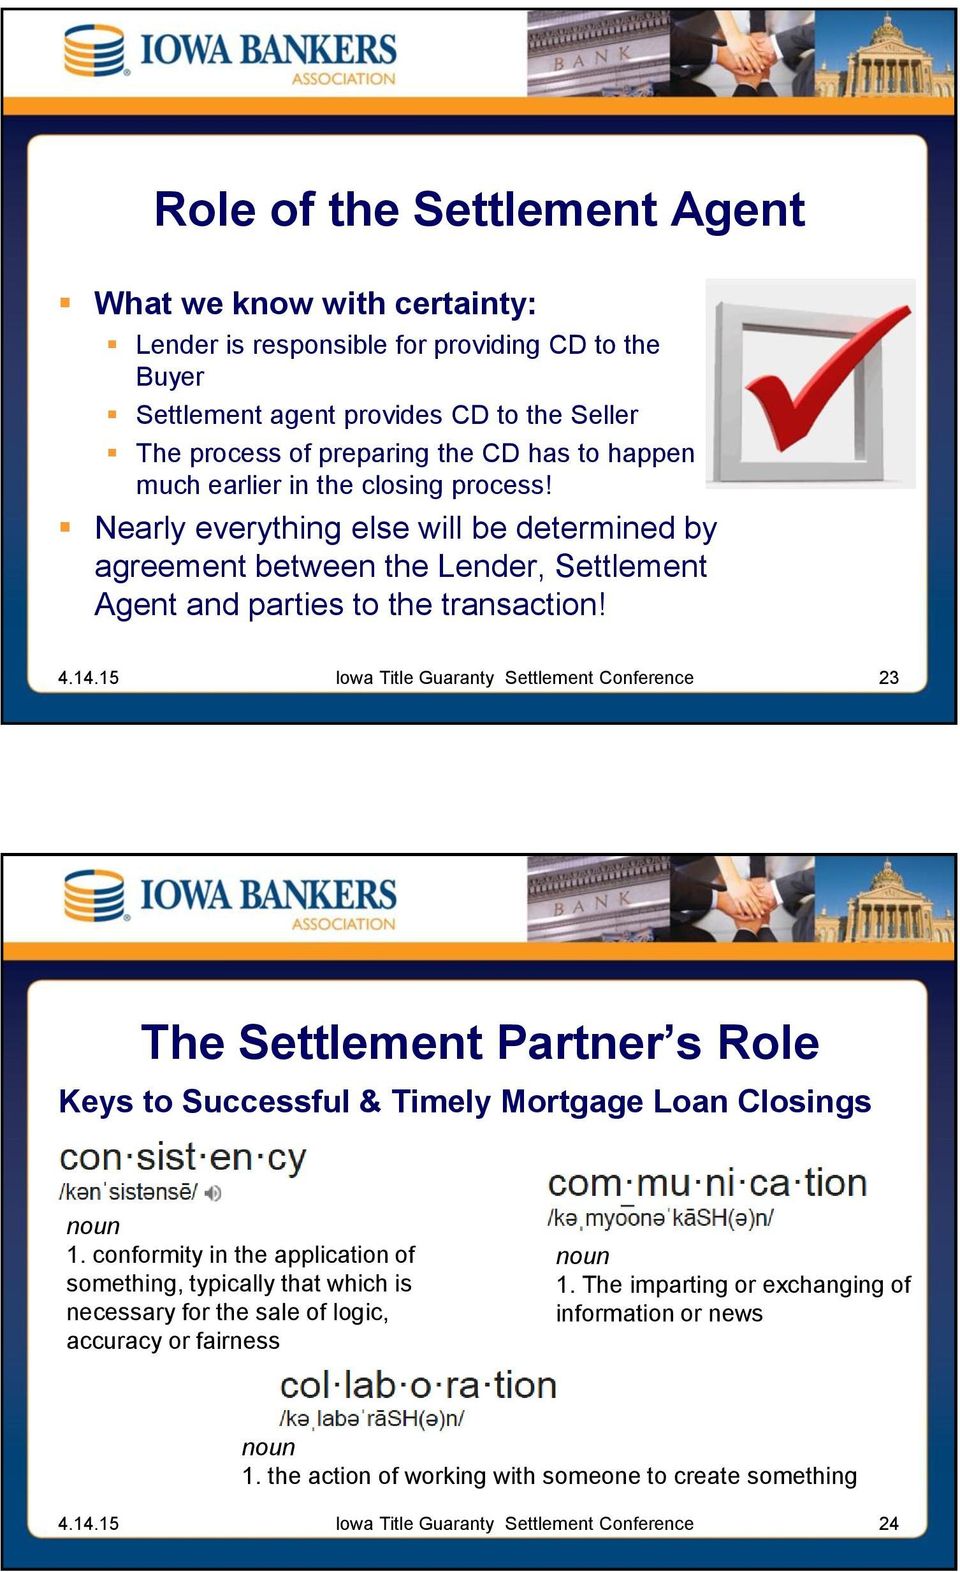 Nearly everything else will be determined by agreement between the Lender, Settlement Agent and parties to the transaction!